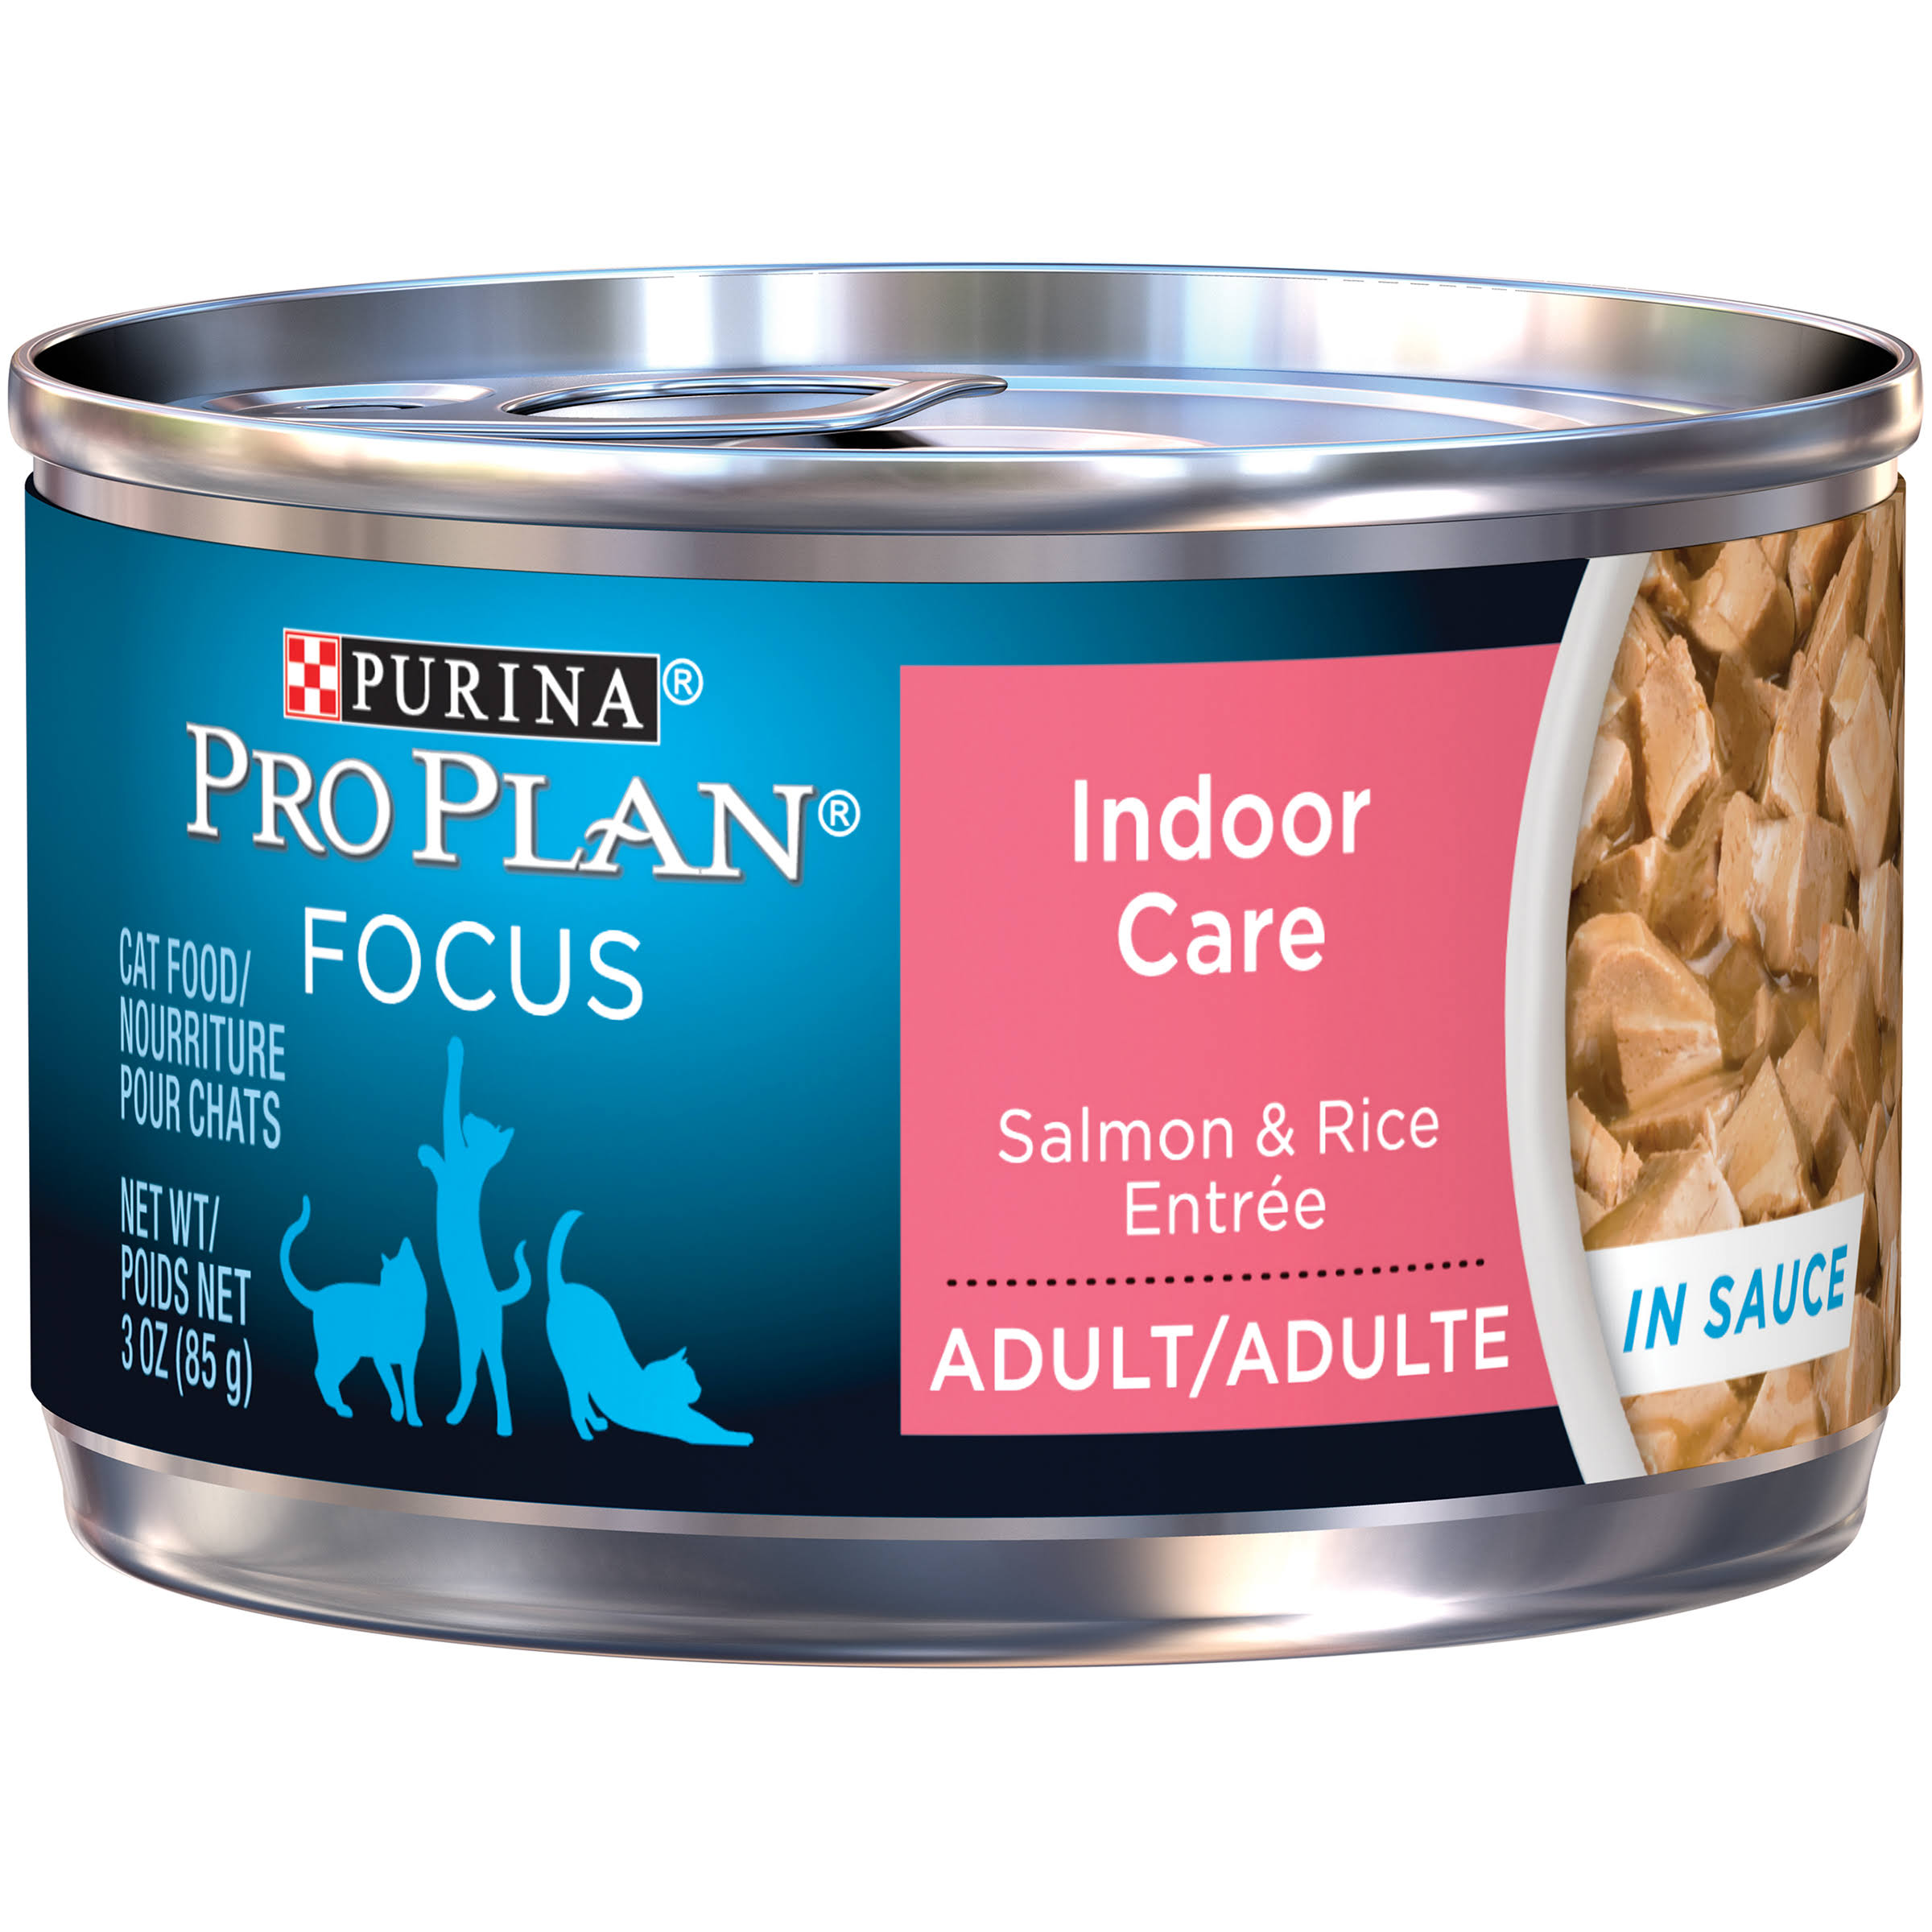 Pro Plan Indoor Care Salmon & Rice Entree, Canned Cat Food, 3 Oz.